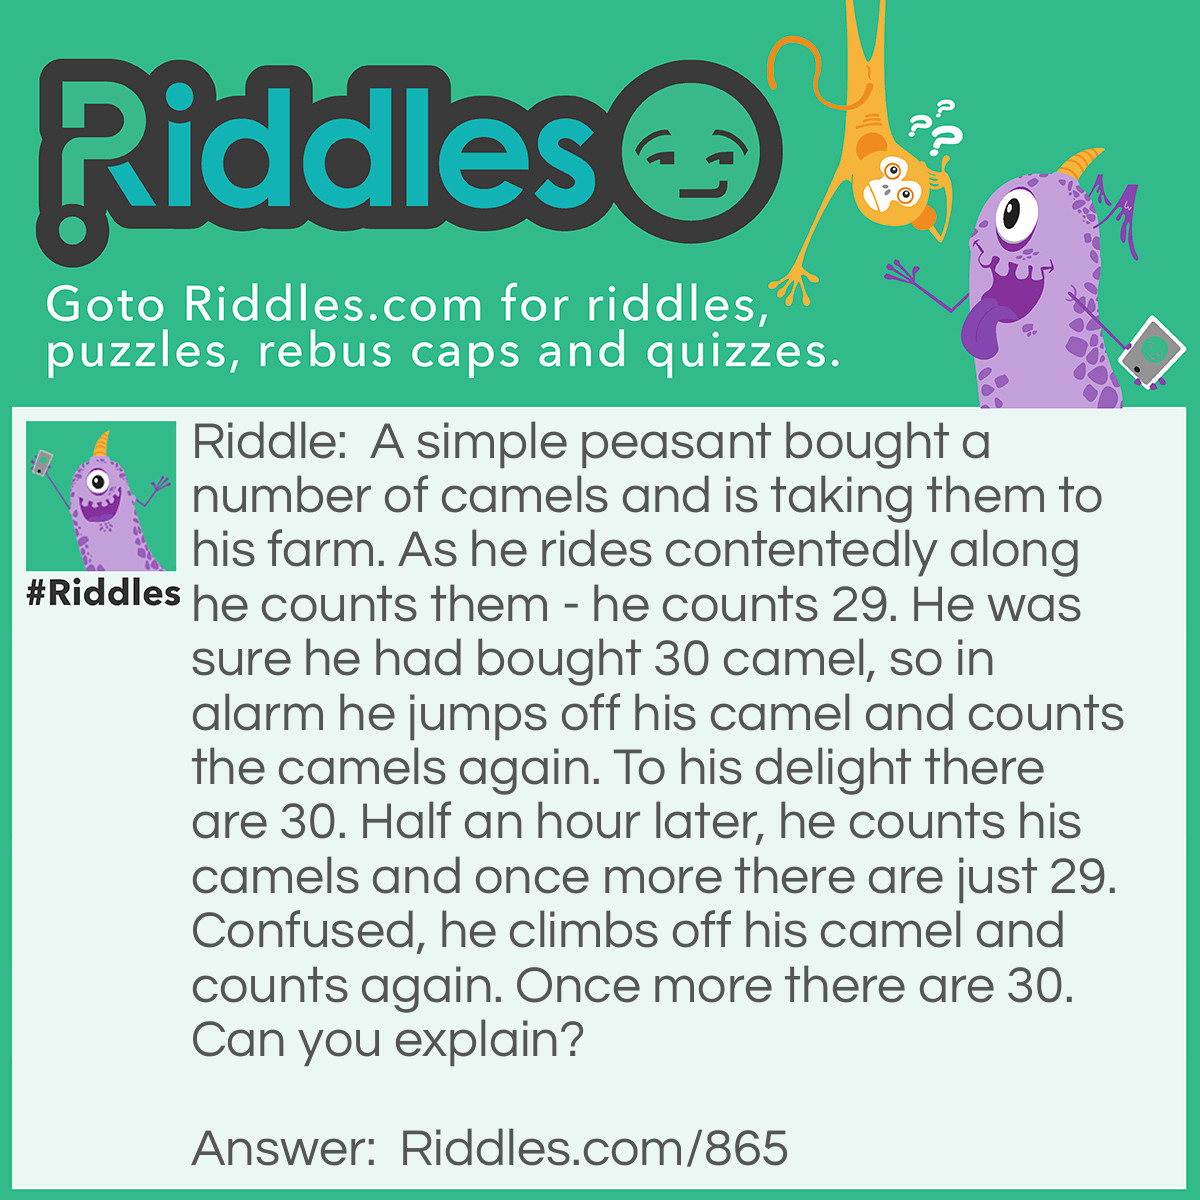 Riddle: A <a href="/easy-riddles">simple</a> peasant bought a number of camels and is taking them to his farm. As he rides contentedly along he counts them - he counts 29. He was sure he had bought 30 camel, so in alarm he jumps off his camel and counted the camels again. To his delight, there are 30. Half an hour later, he counts his camels and once more there are just 29. Confused, he climbs off his camel and counts again. Once more there are 30. Can you explain? Answer: When he is on the camel he omits to count it.